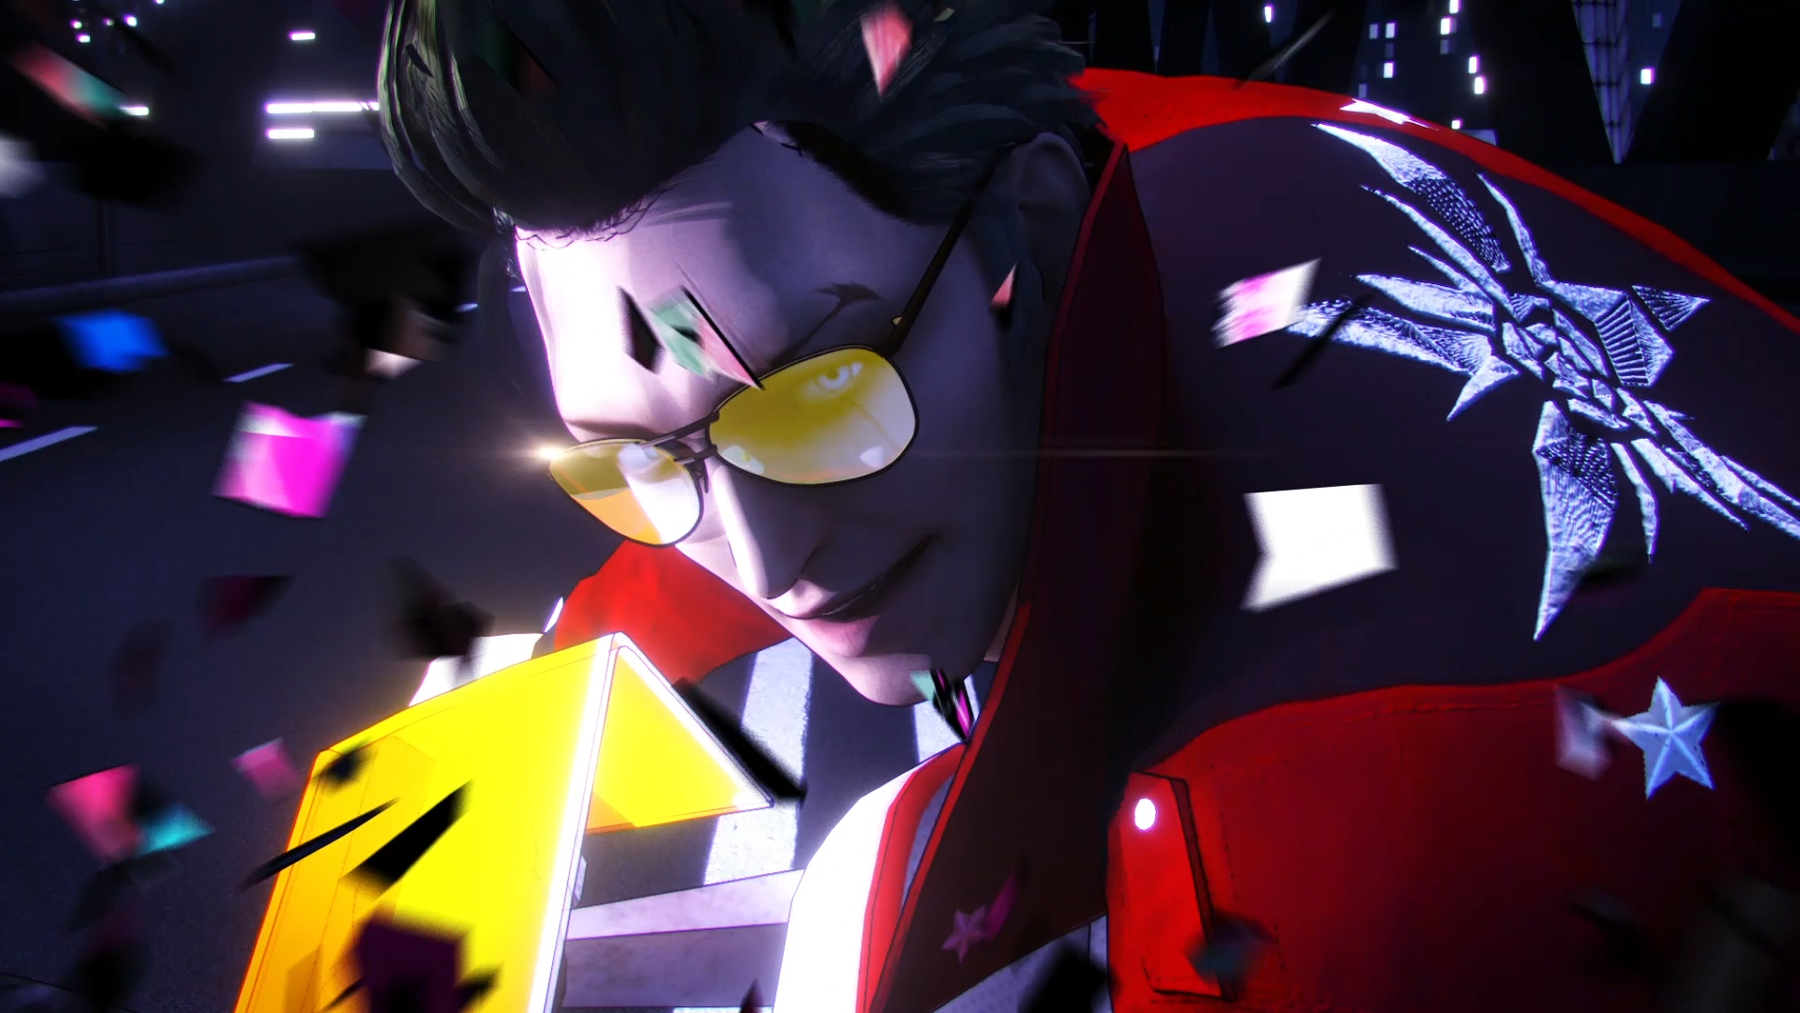 Switch Exclusive No More Heroes 3 Has Been Delayed To 2021 Wilson S Media - all 3 new secret op working codes november 2019 roblox black hole simulator